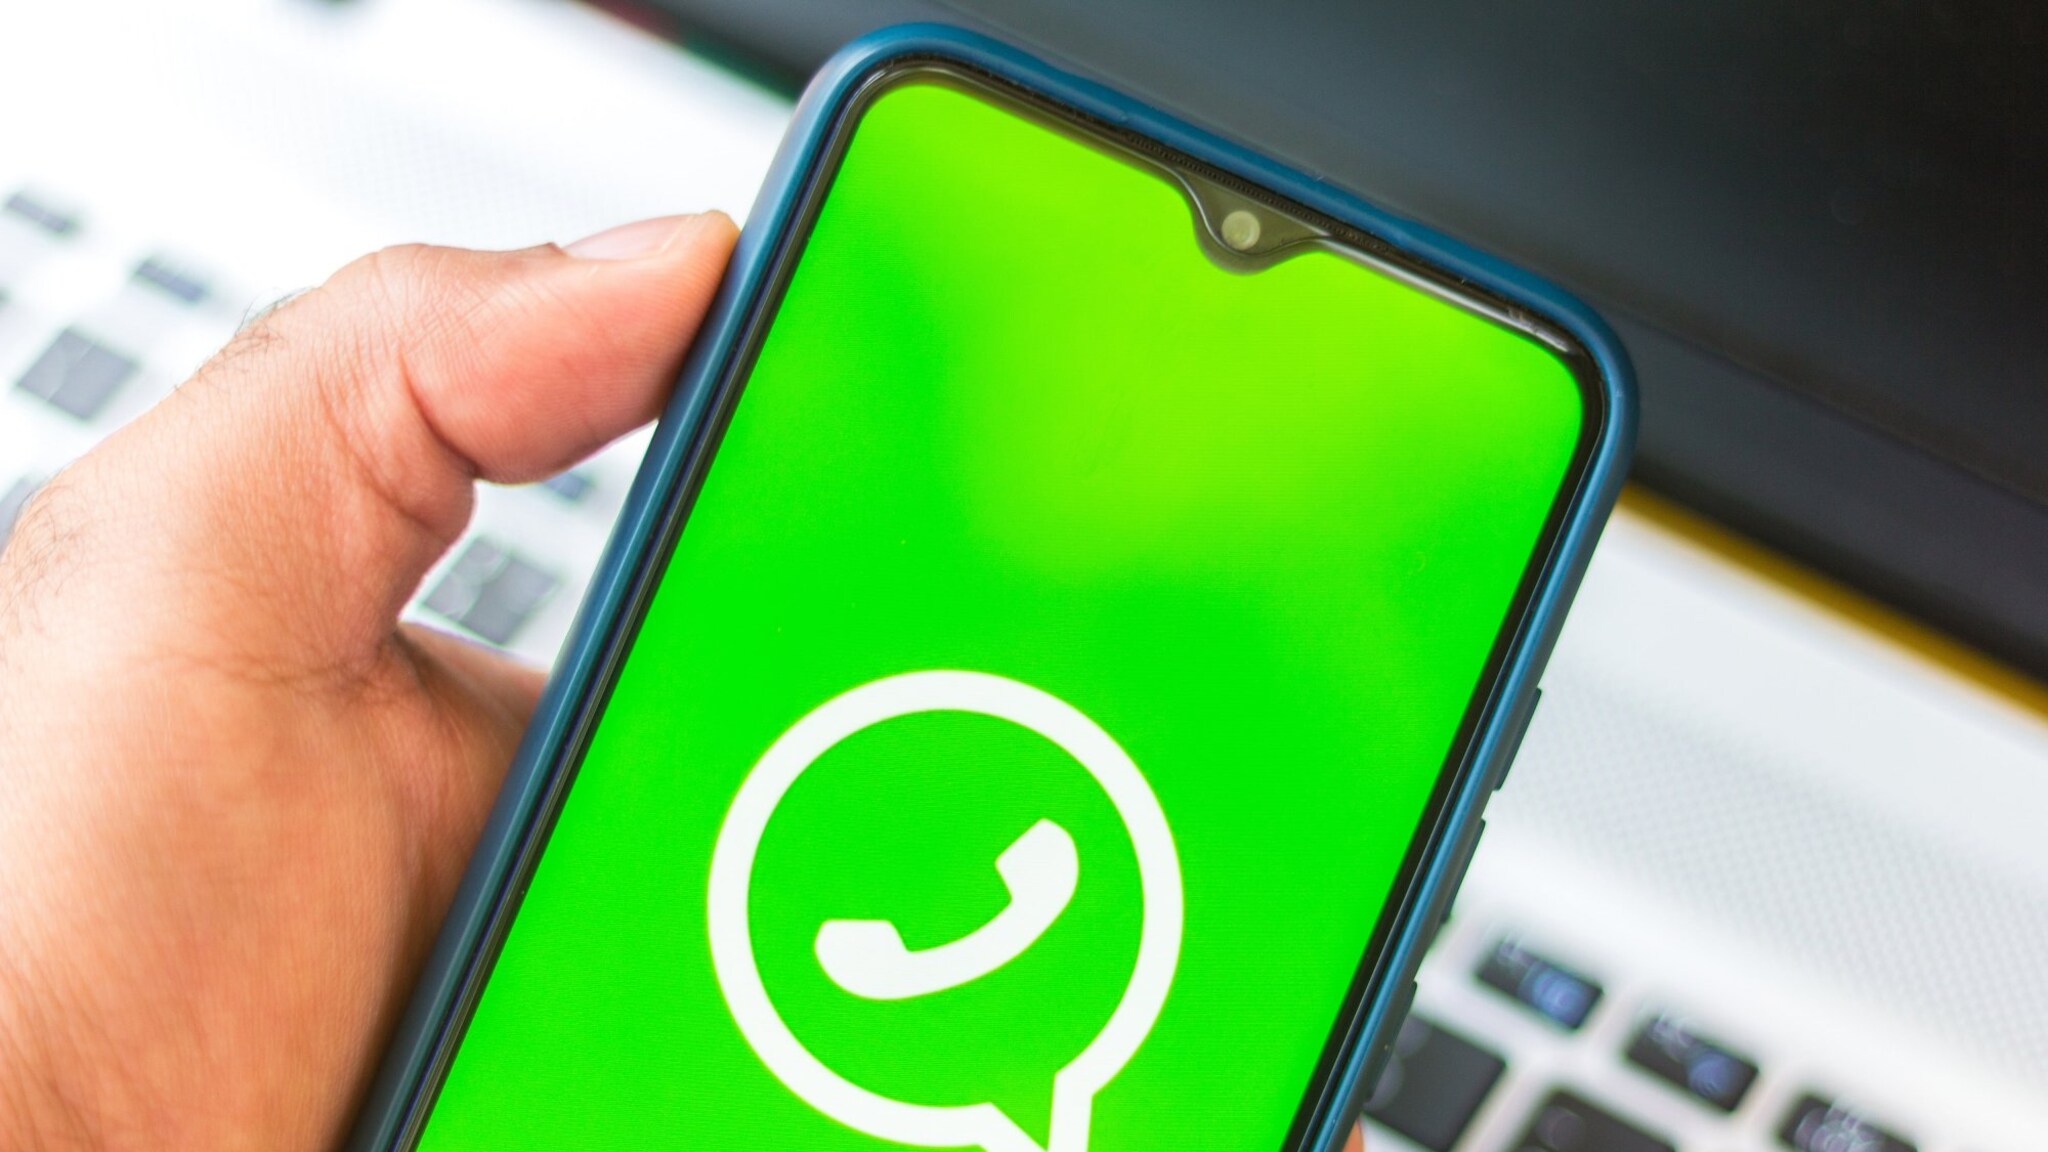 Your WhatsApp account can now be used on multiple phones